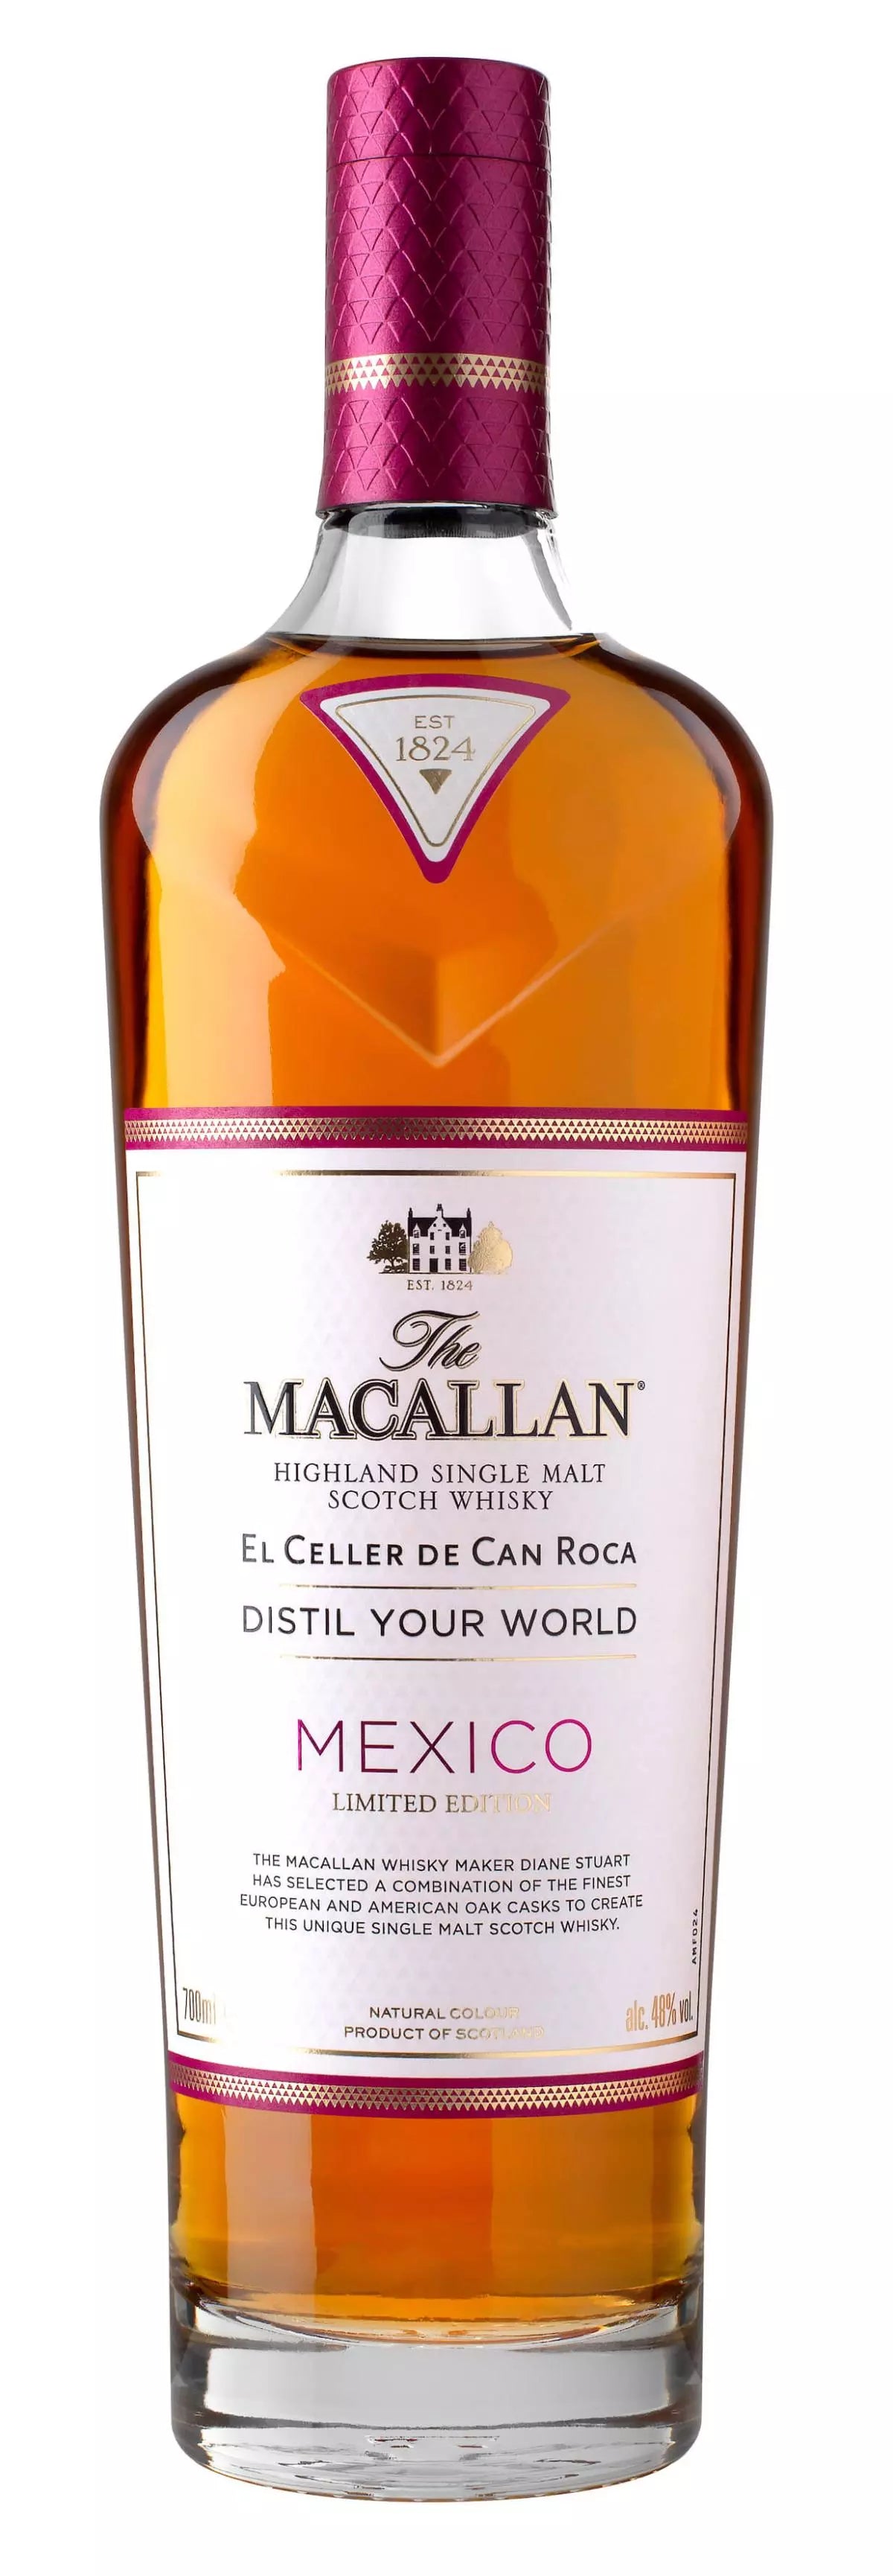 Macallan Mexico Limited Edition El Celler De Can Roca Distil Your World 700mL a tall clear glass bottle with a white label and purple top